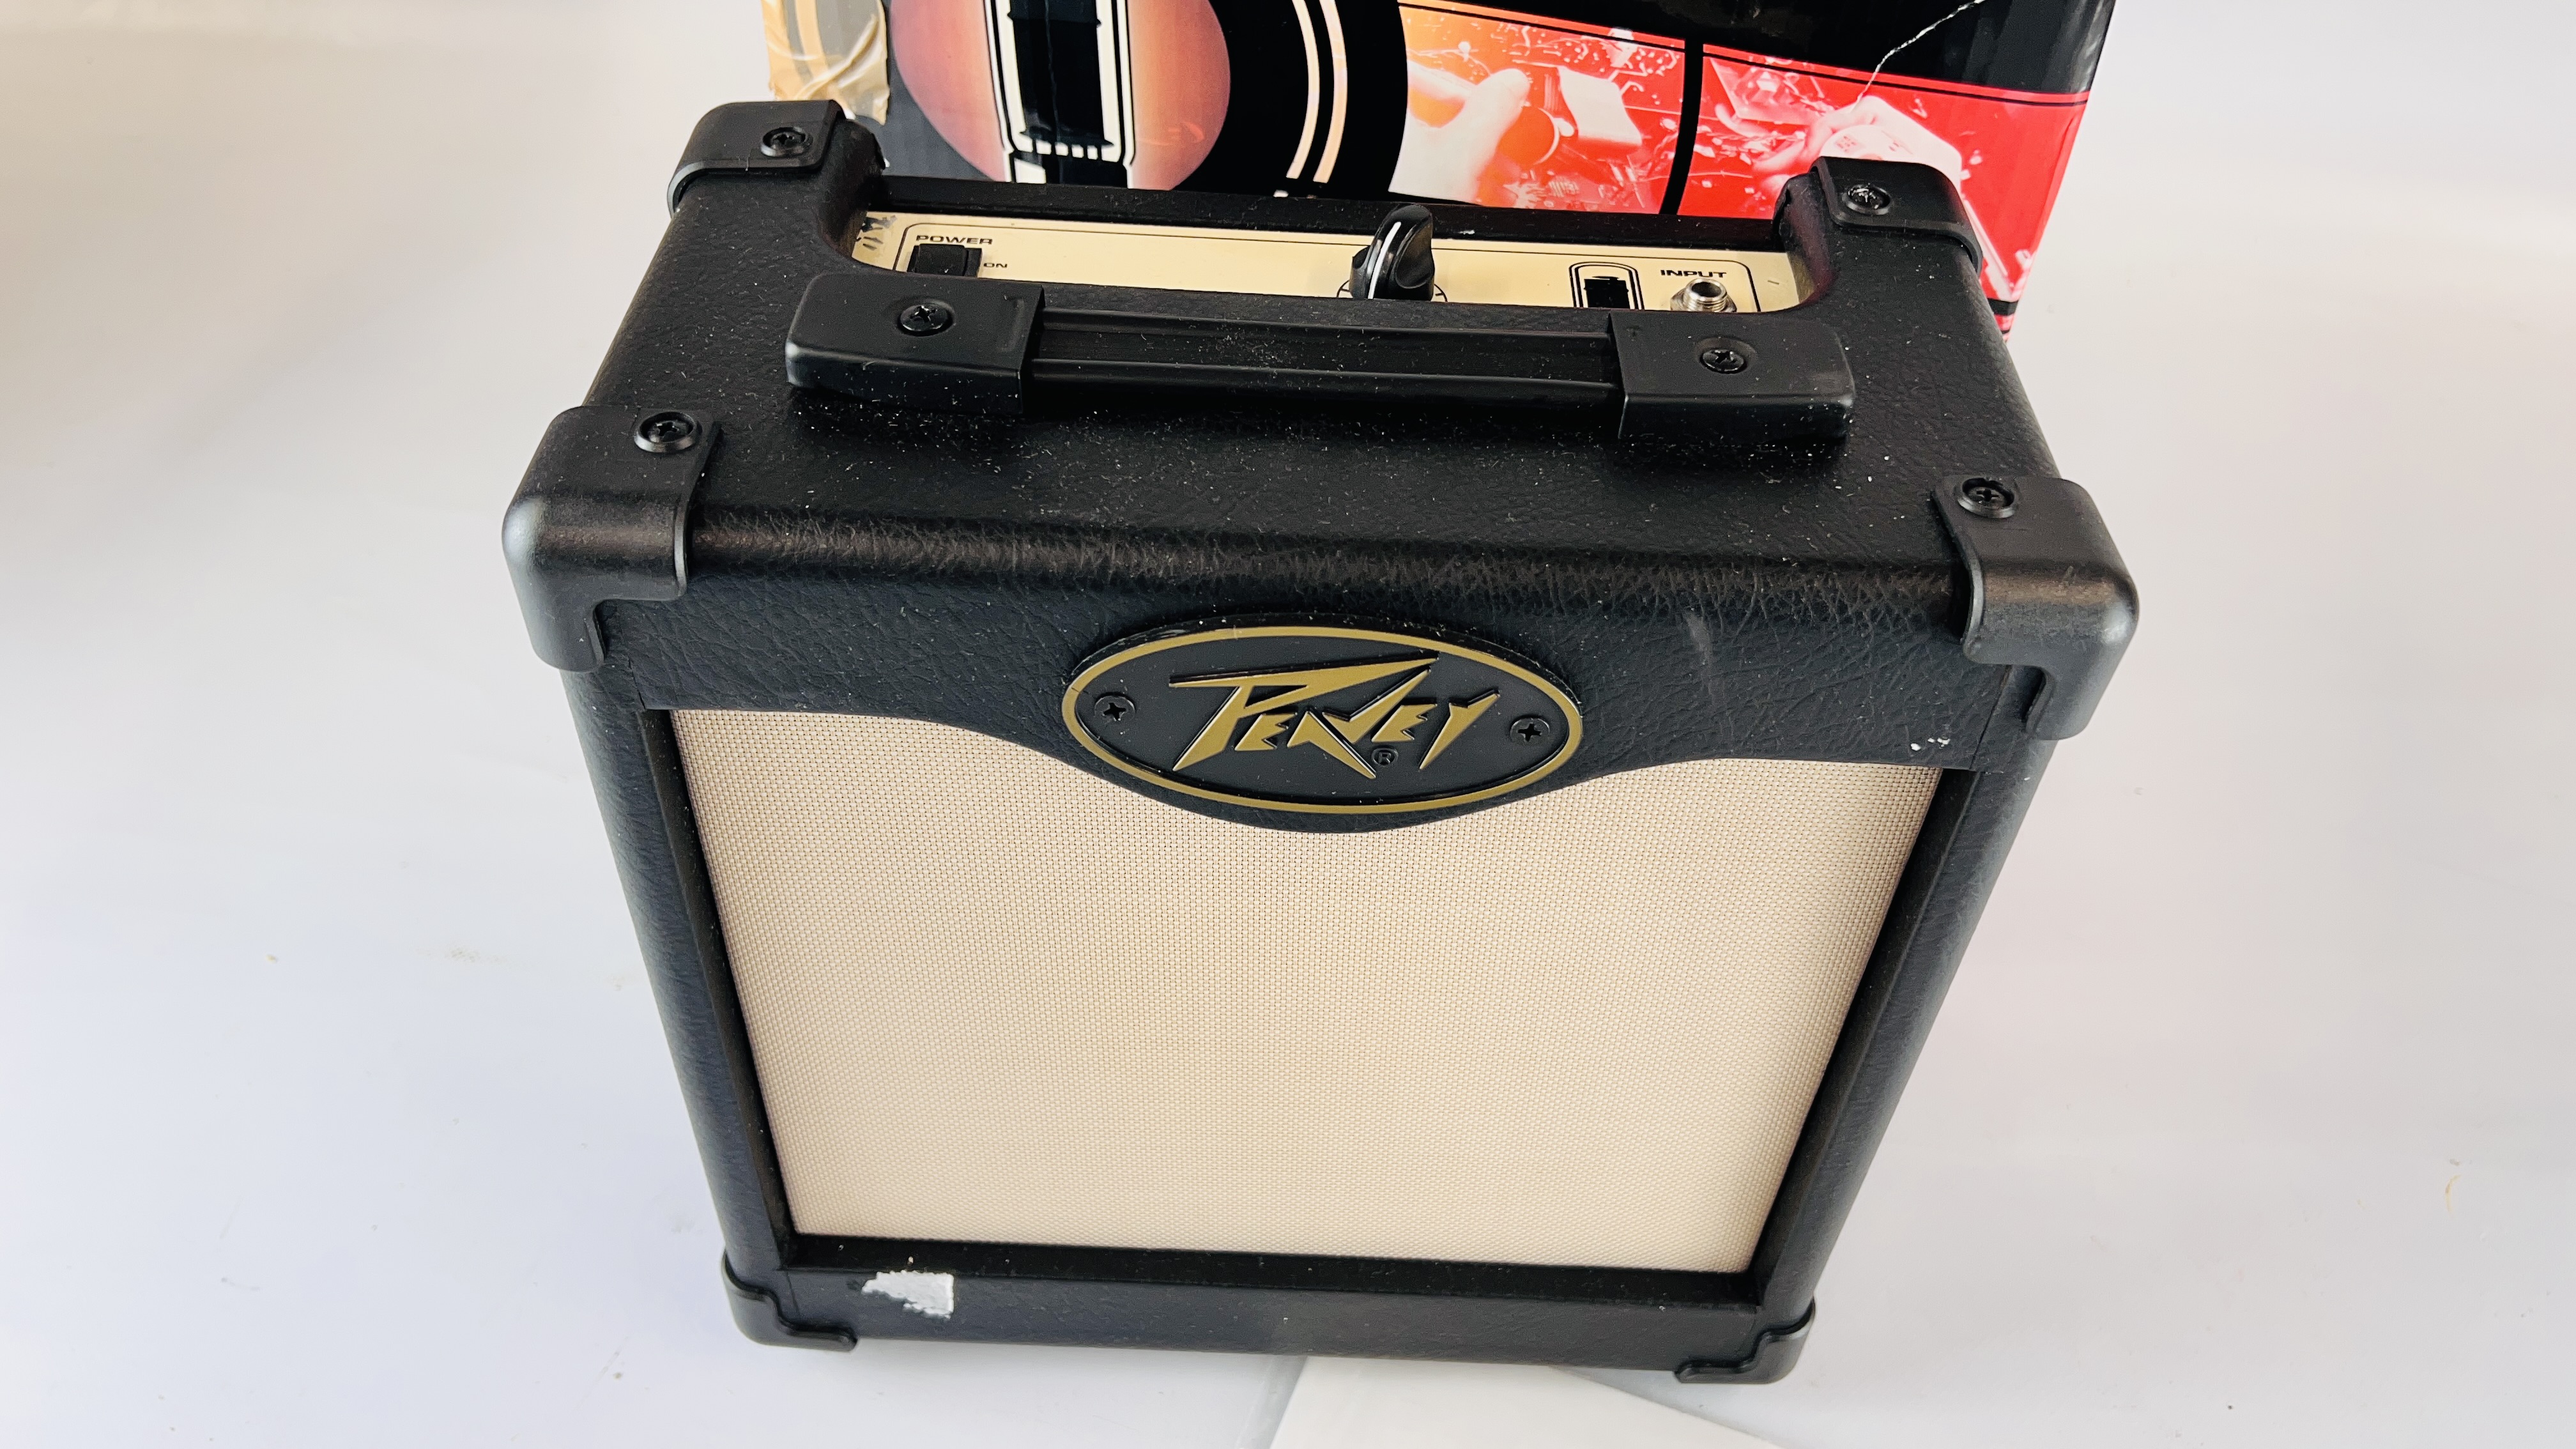 BOXED NANO VALVE PEAVEY PRACTICE AMP - SOLD AS SEEN. - Image 2 of 4